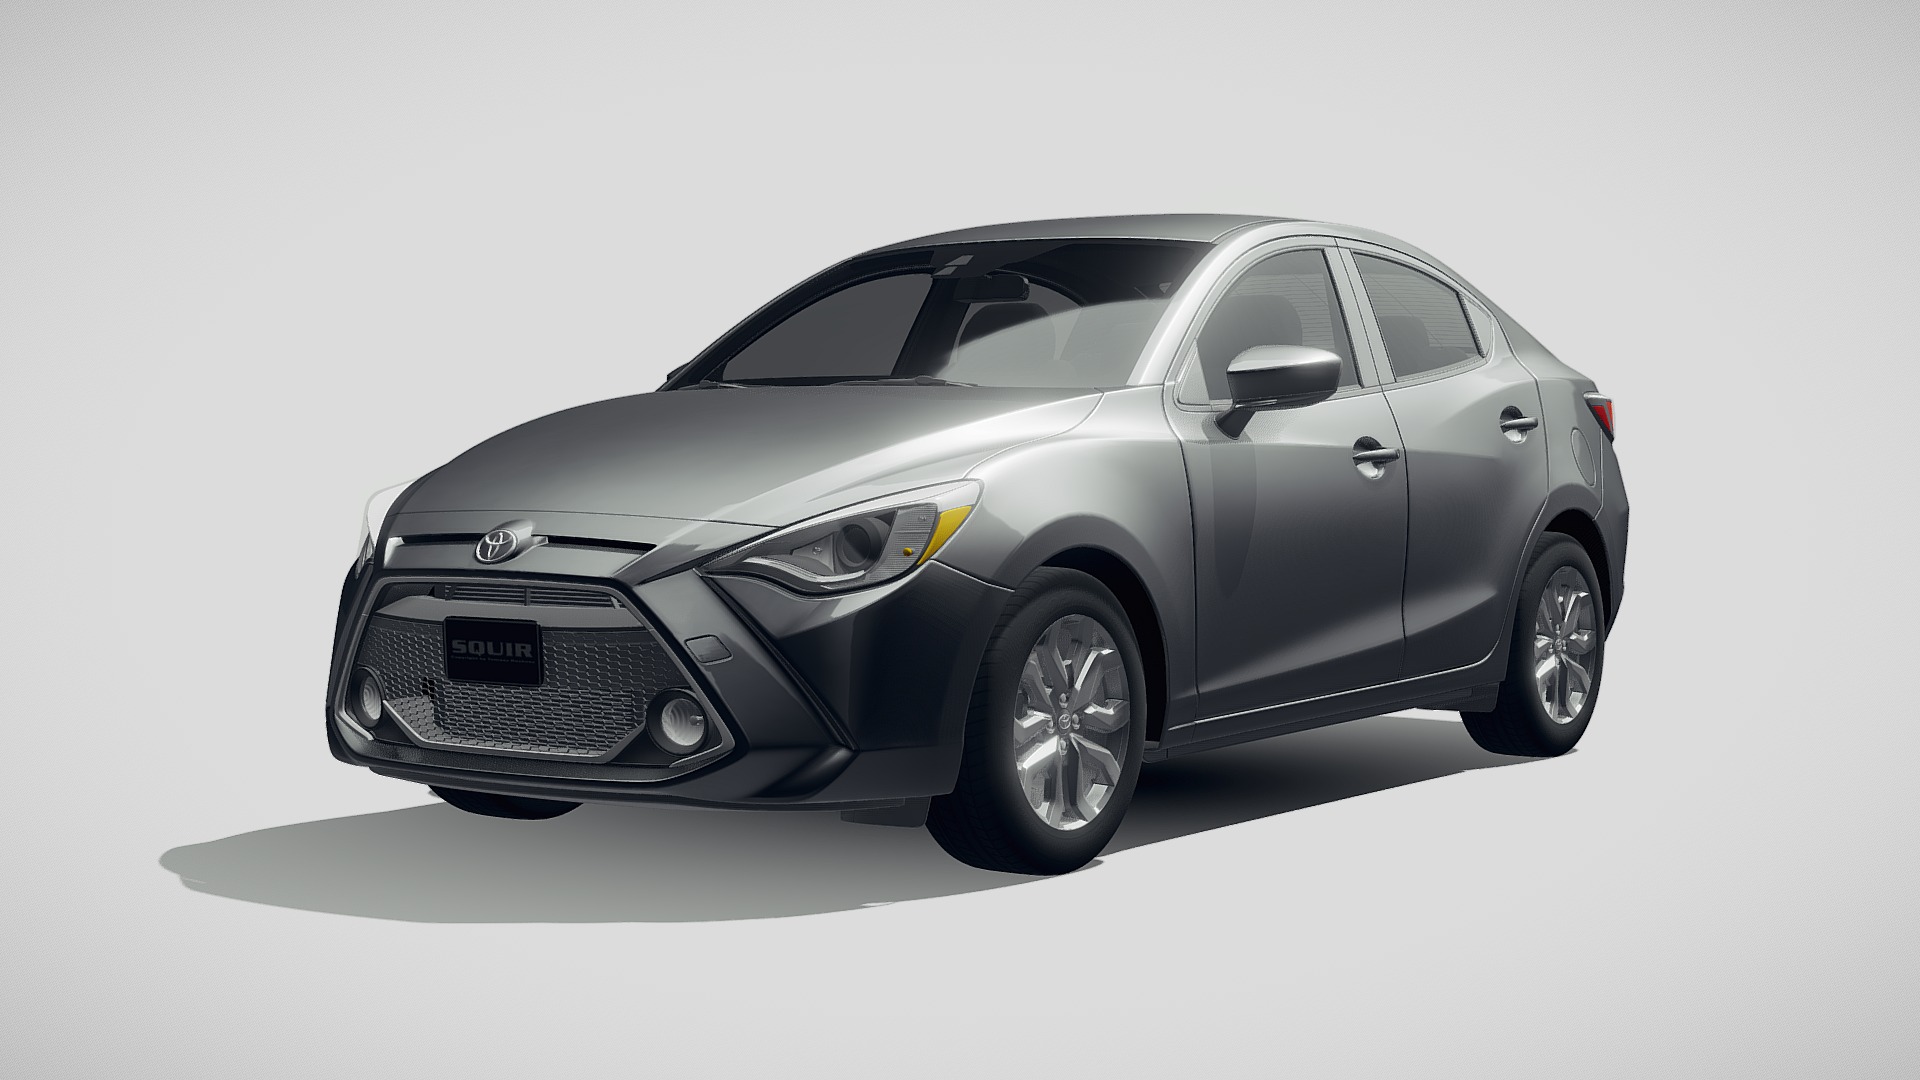 3D model Toyota Yaris sedan 2019 - This is a 3D model of the Toyota Yaris sedan 2019. The 3D model is about a silver car with a white background.